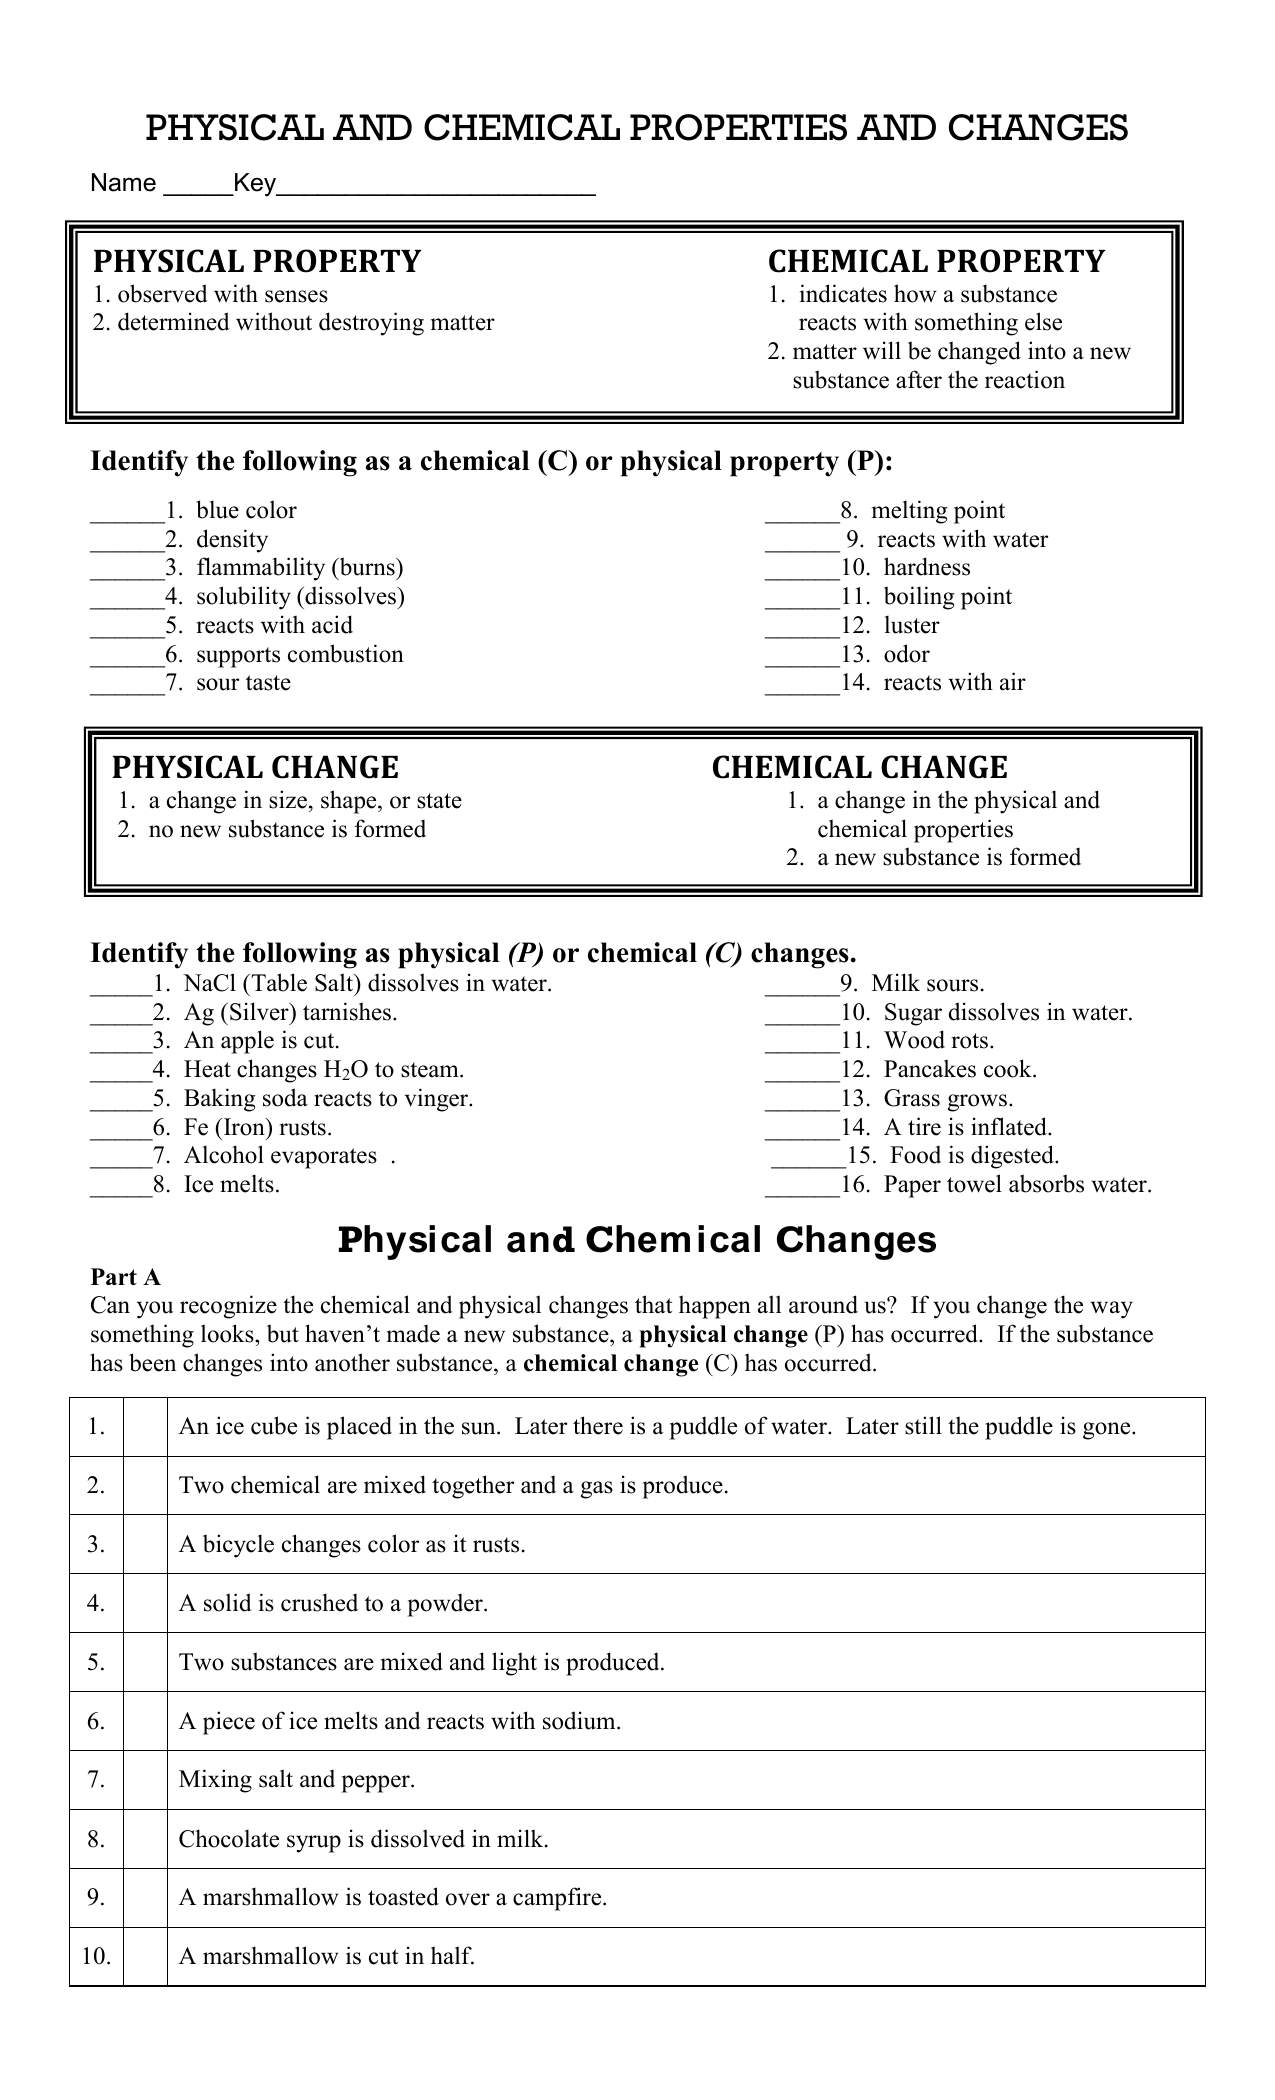 Physical and Chemical Properties and Changes and KEY With Regard To Chemical And Physical Changes Worksheet